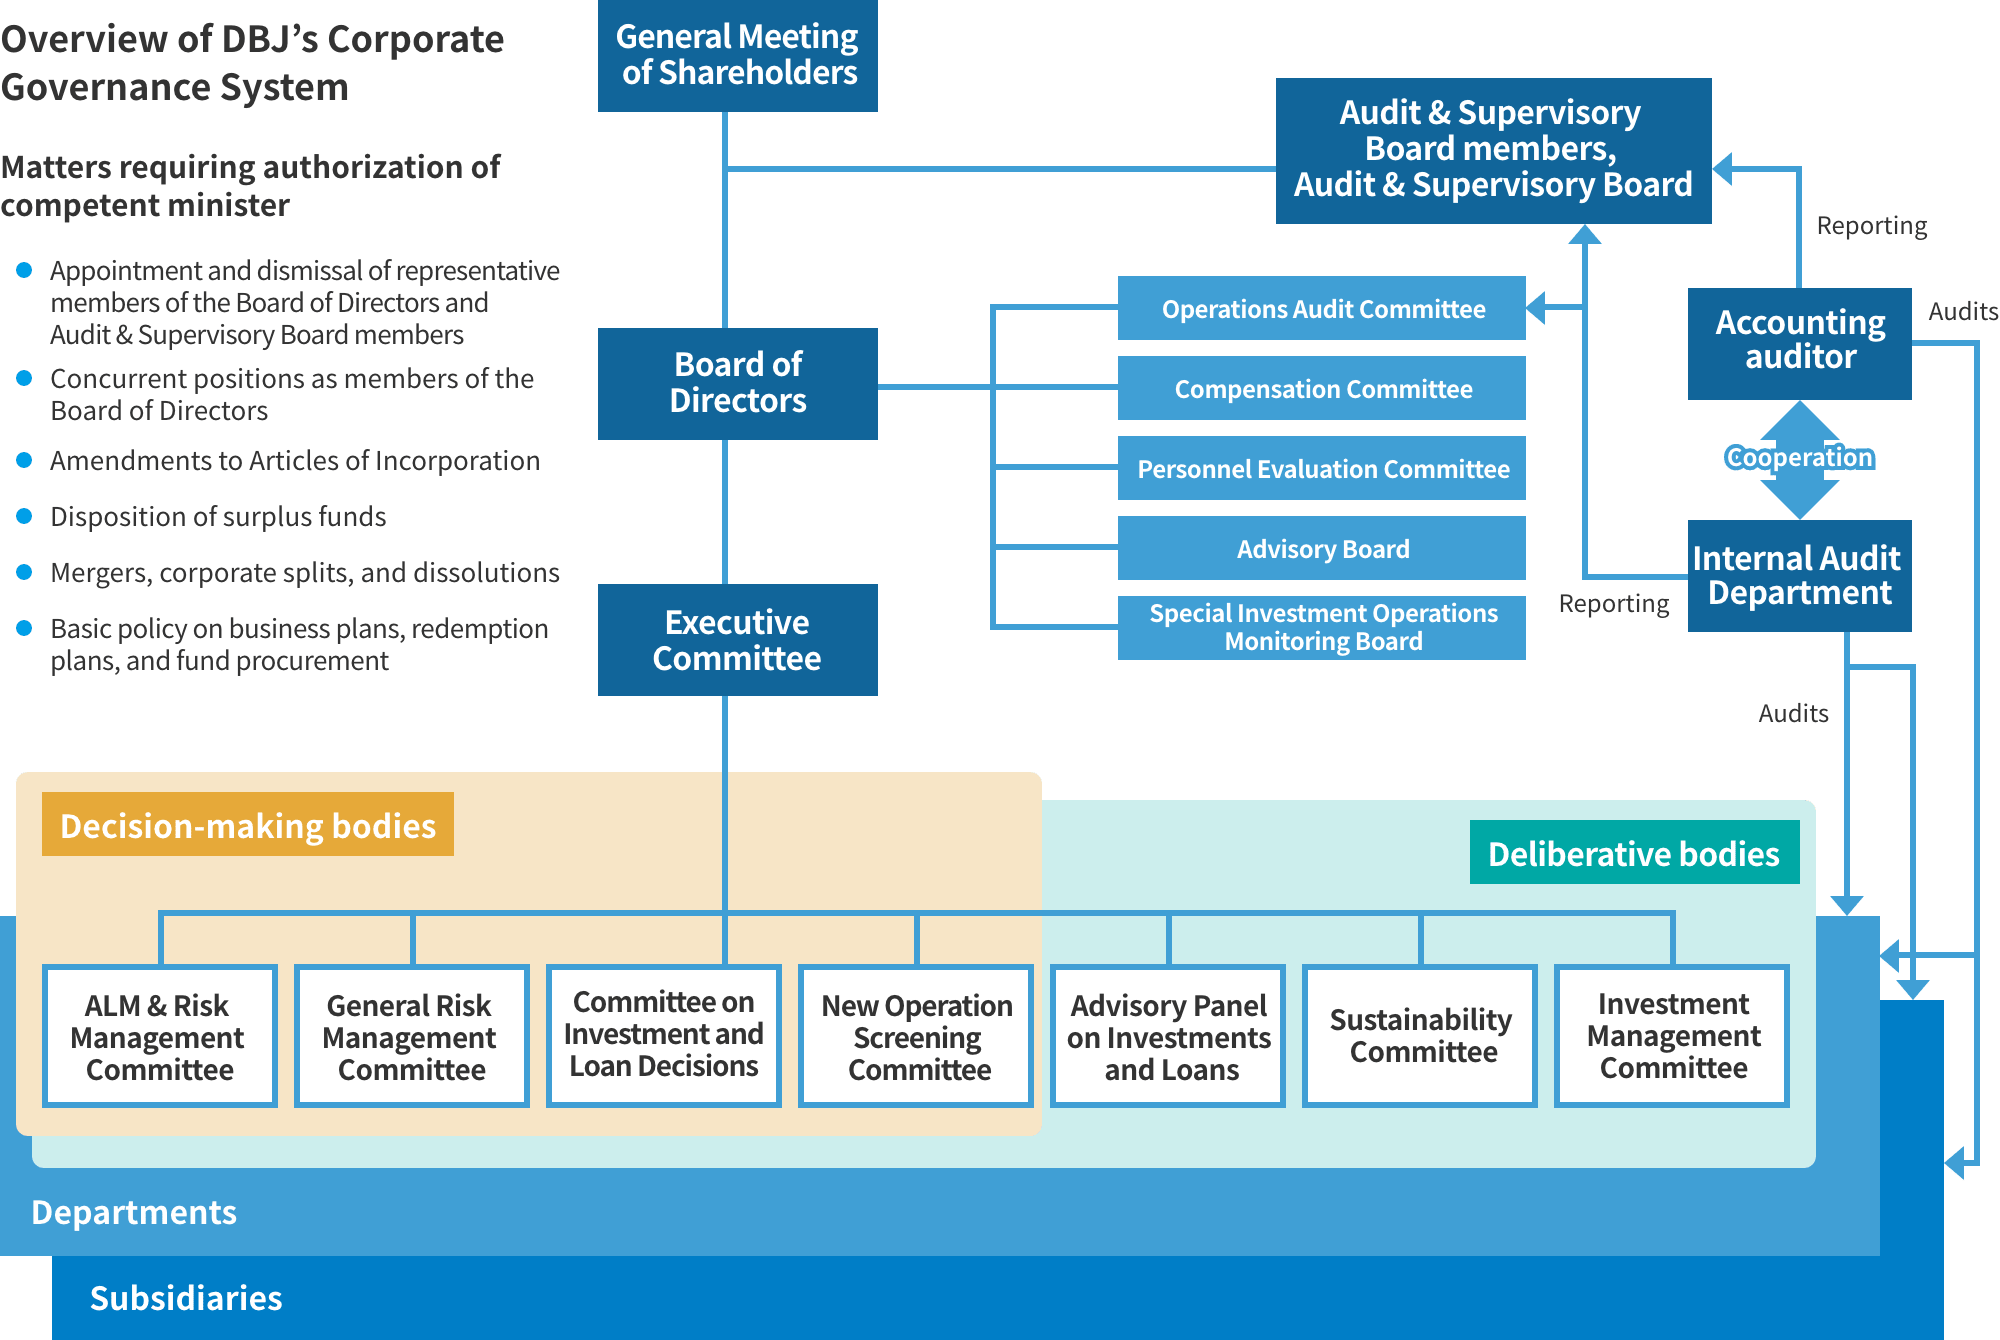 Overview of DBJ's Corporate Governance System